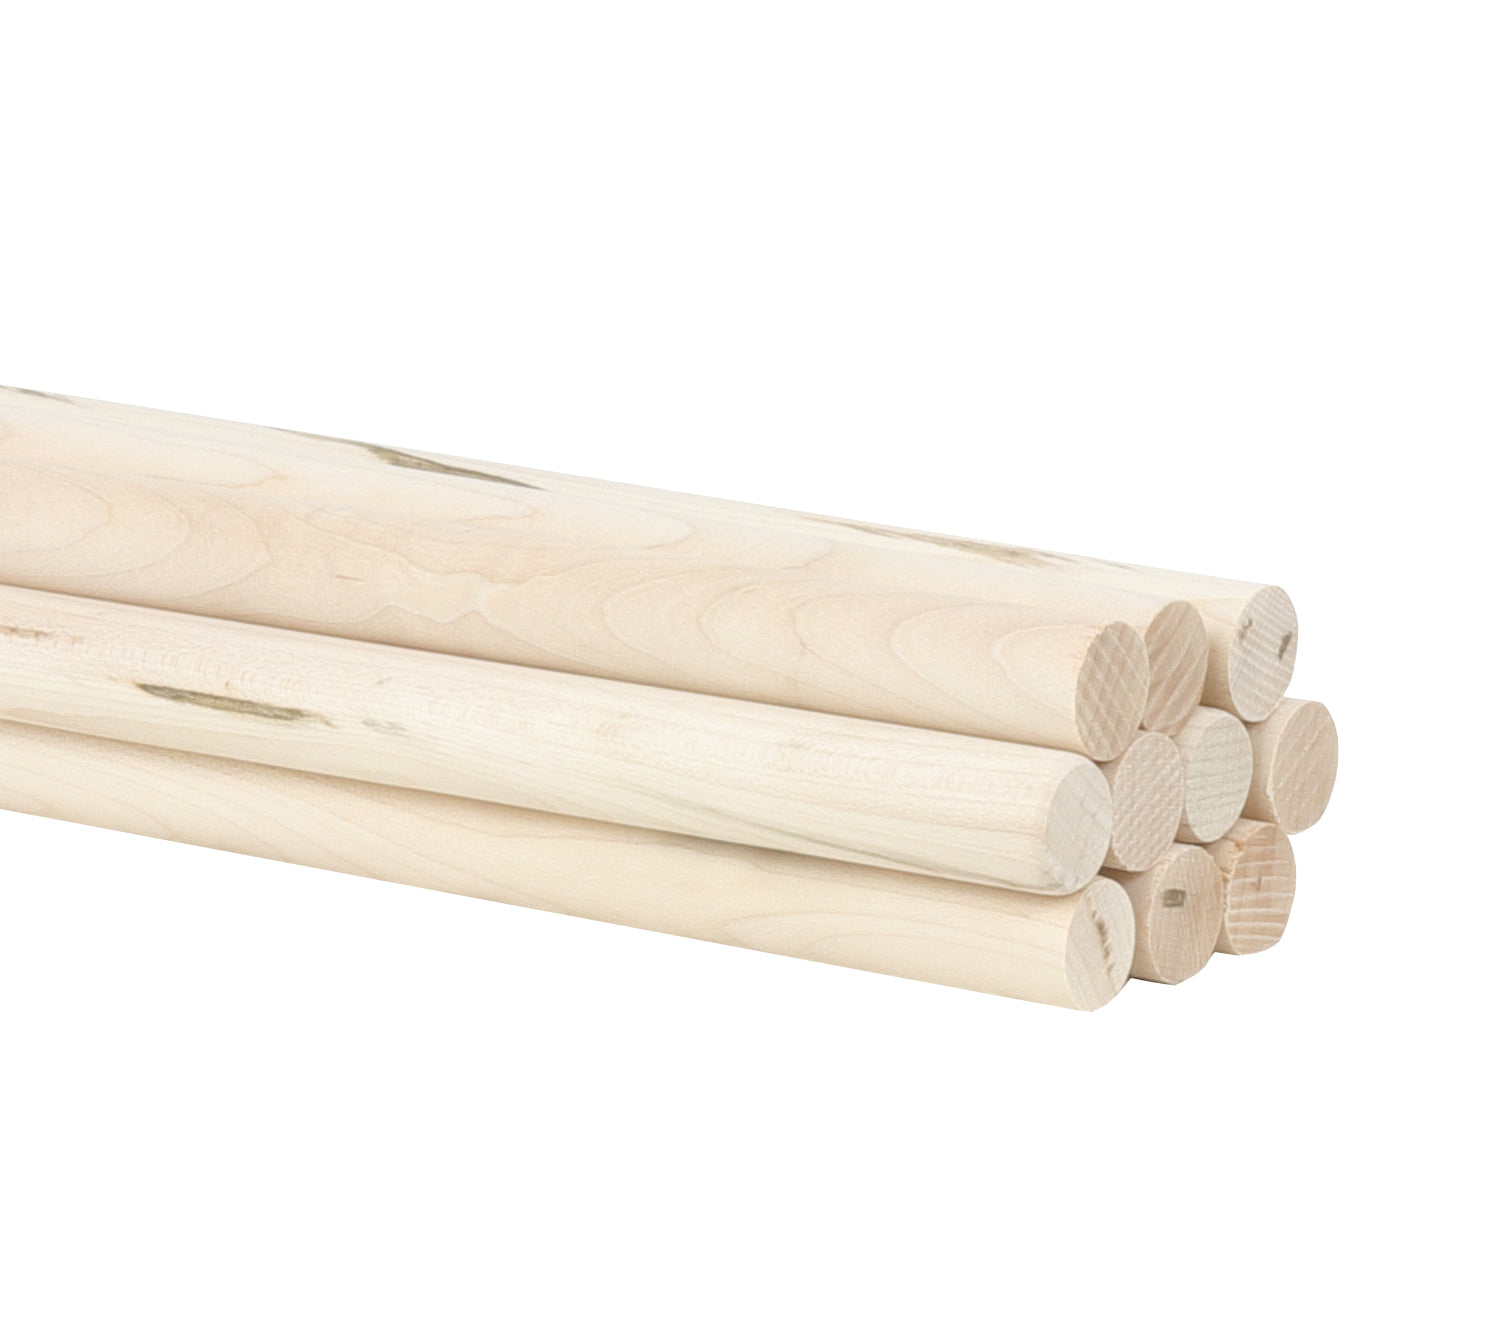 Wooden Crafting Twigs 24 Pack